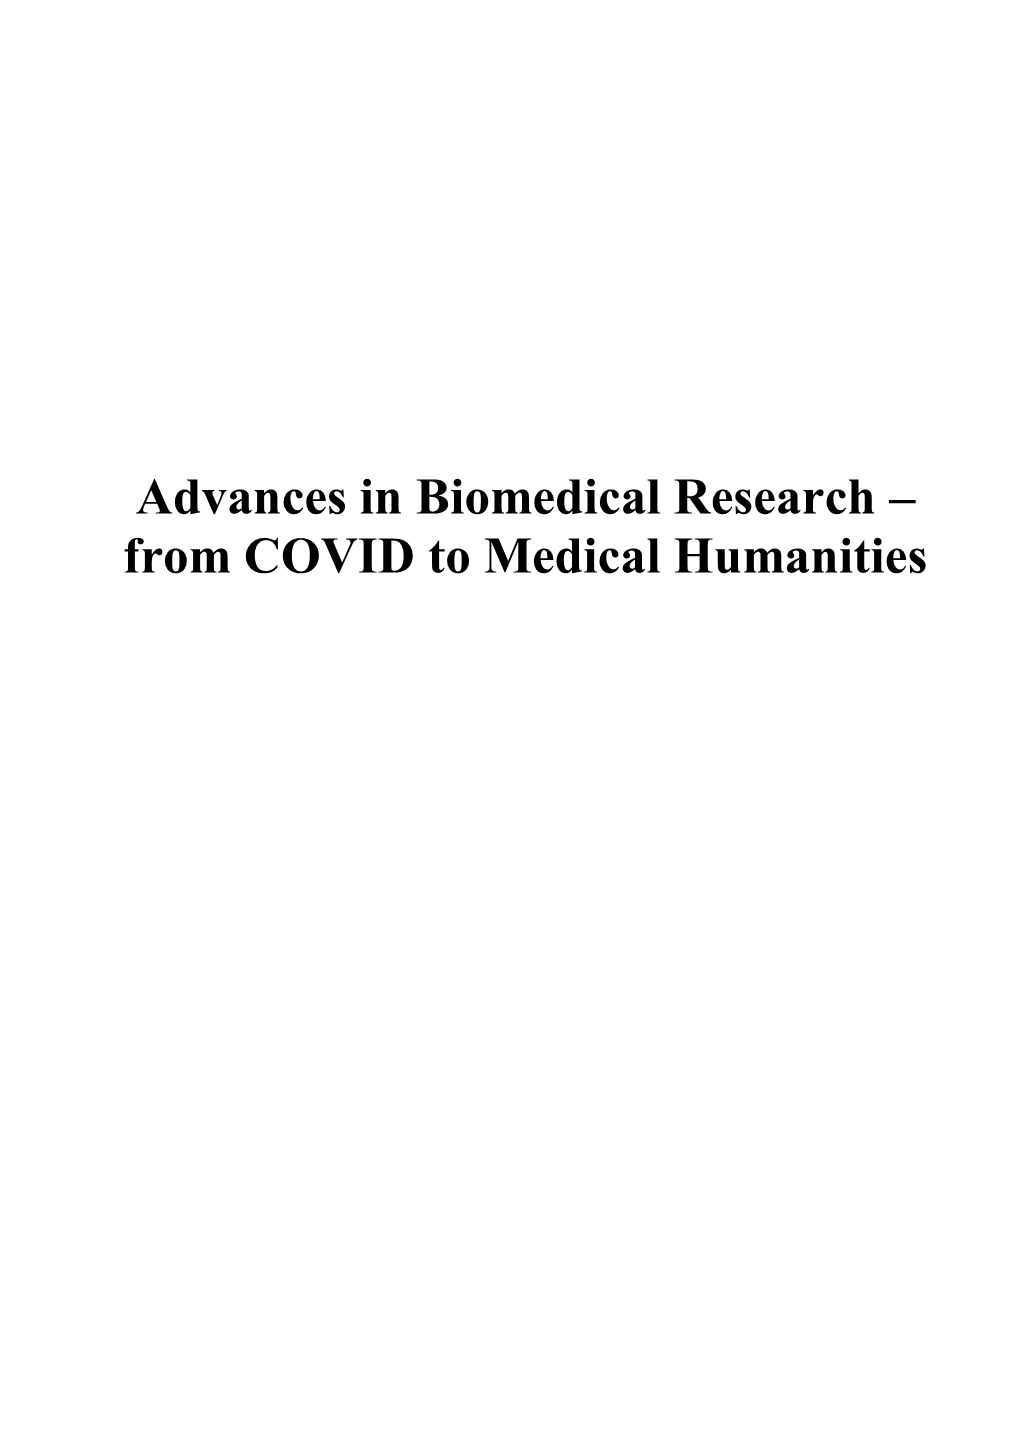 Advances in Biomedical Research – from COVID to Medical Humanities